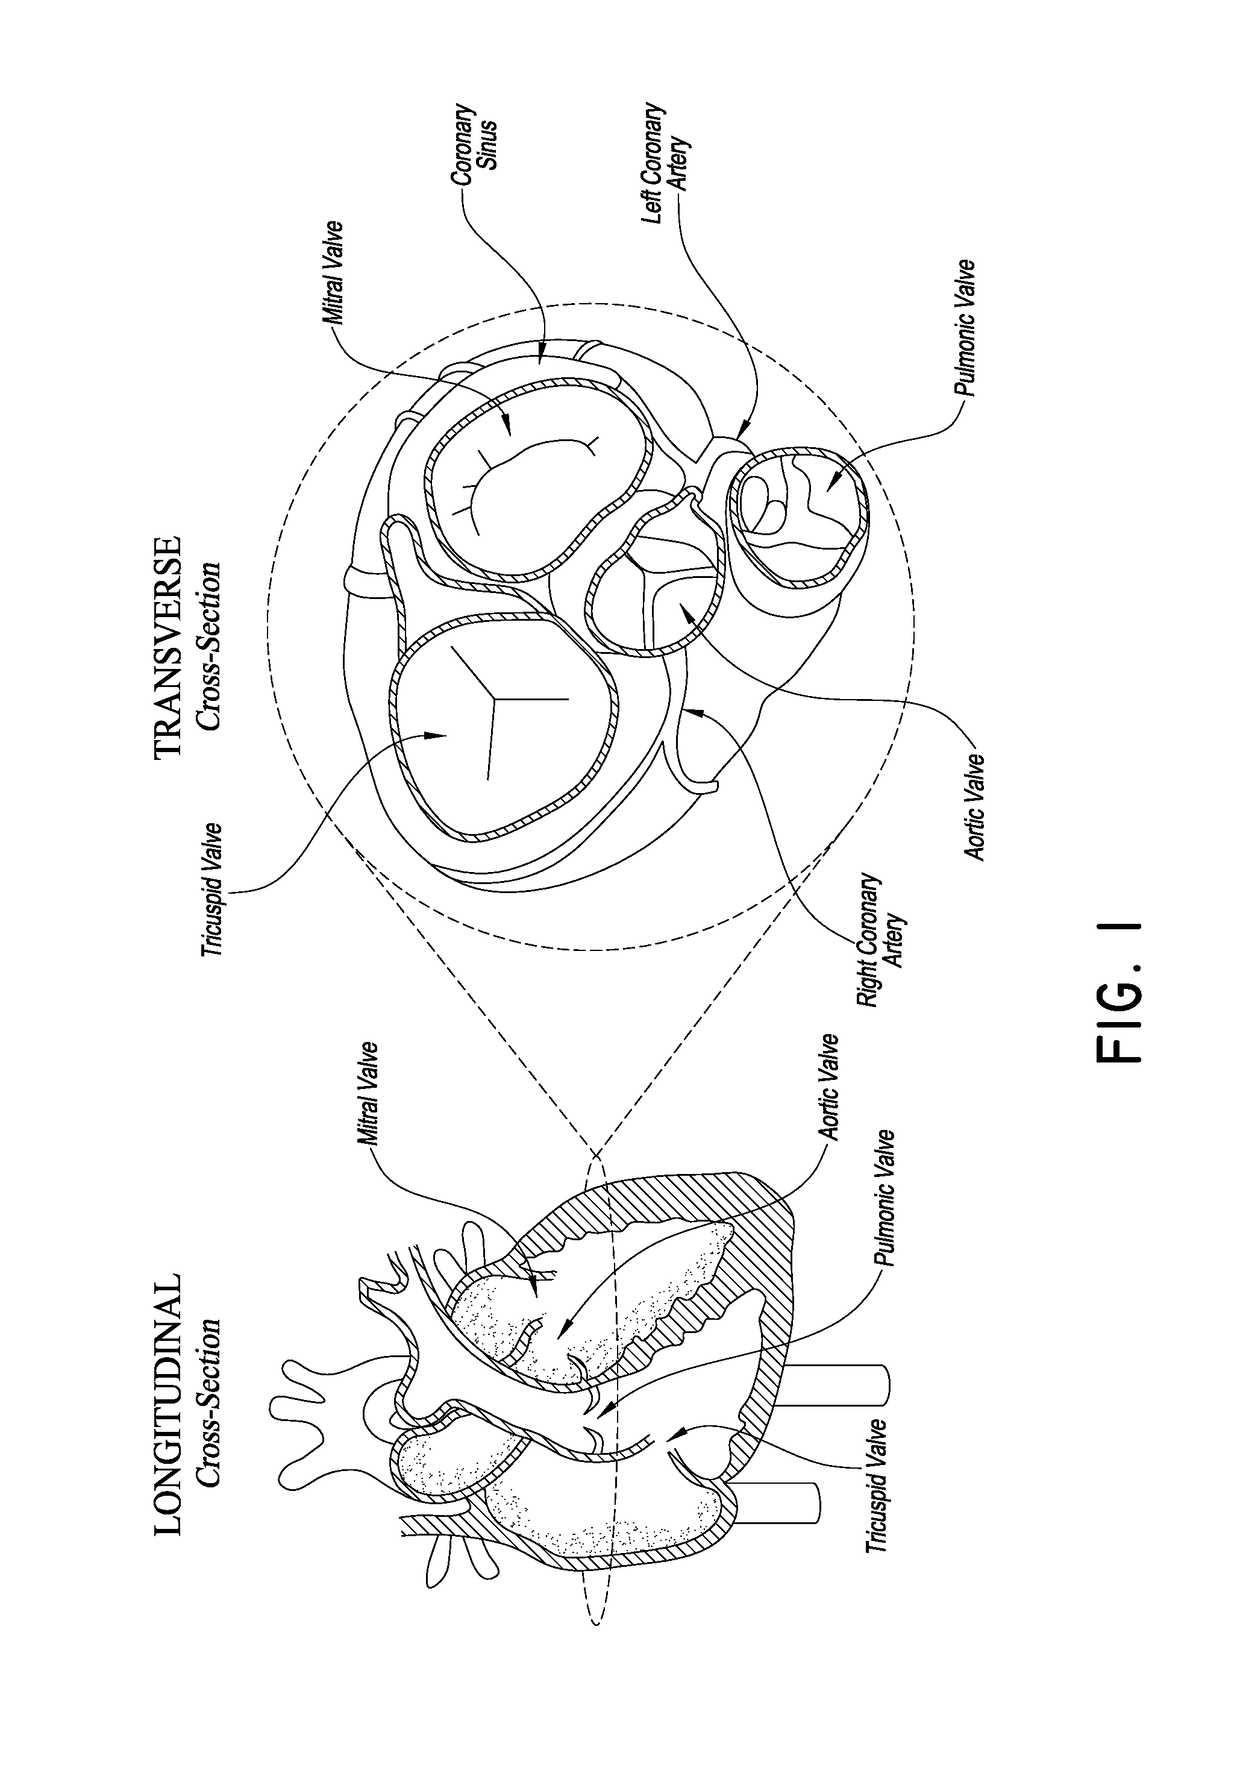 Catheter based apical approach heart prostheses delivery system